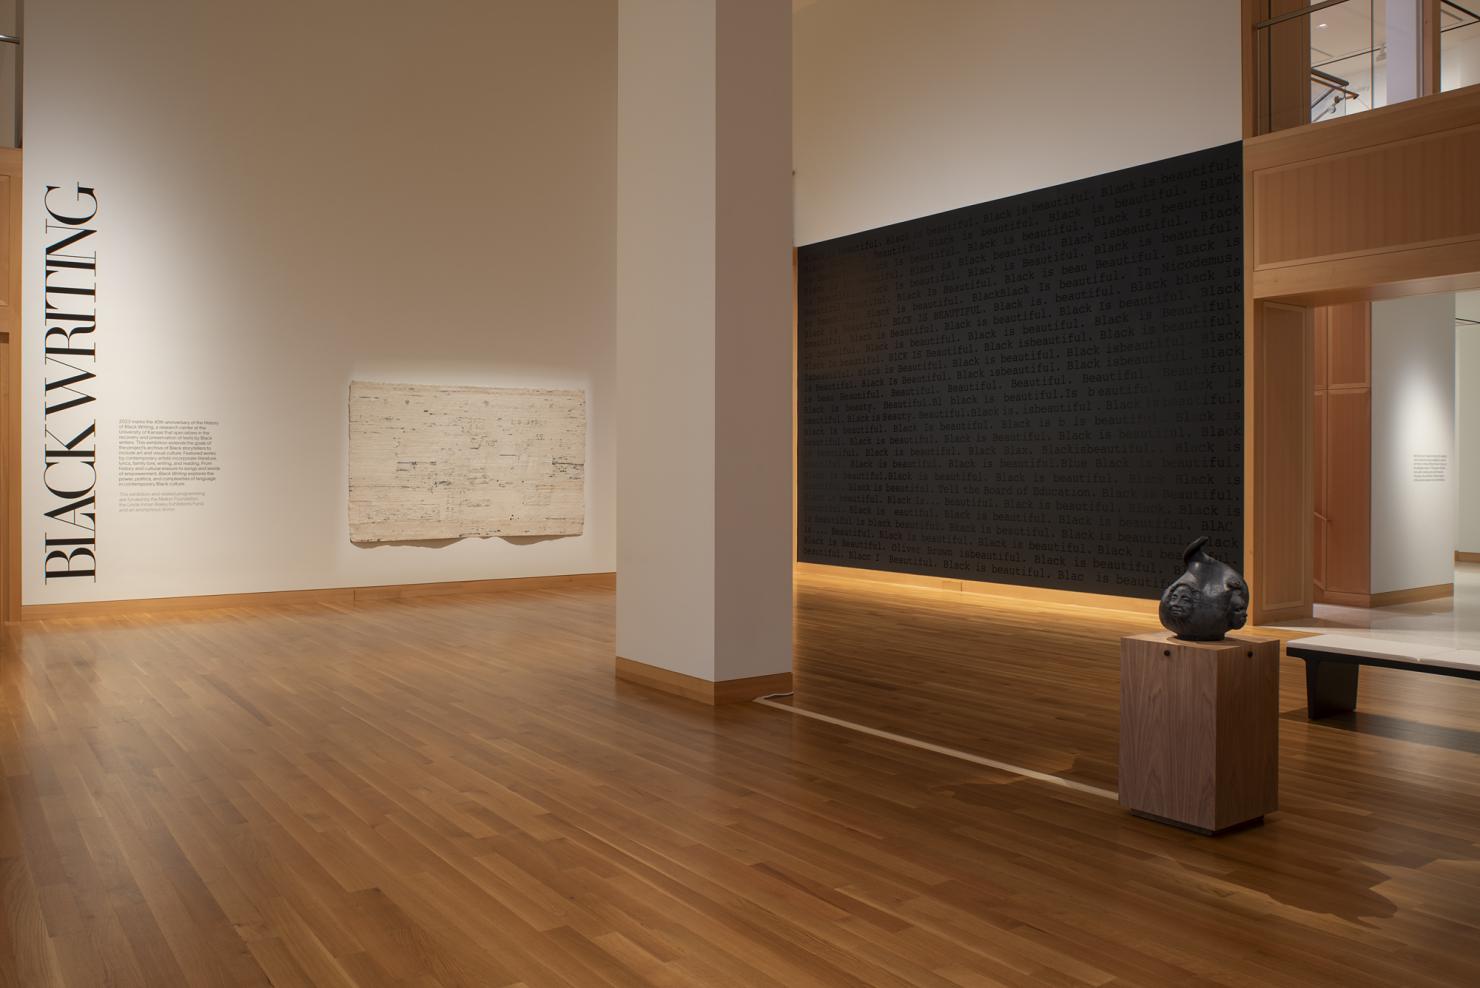 A large gallery with wood floors, one all black wall, the words 'Black Writing' in large text on the other wall